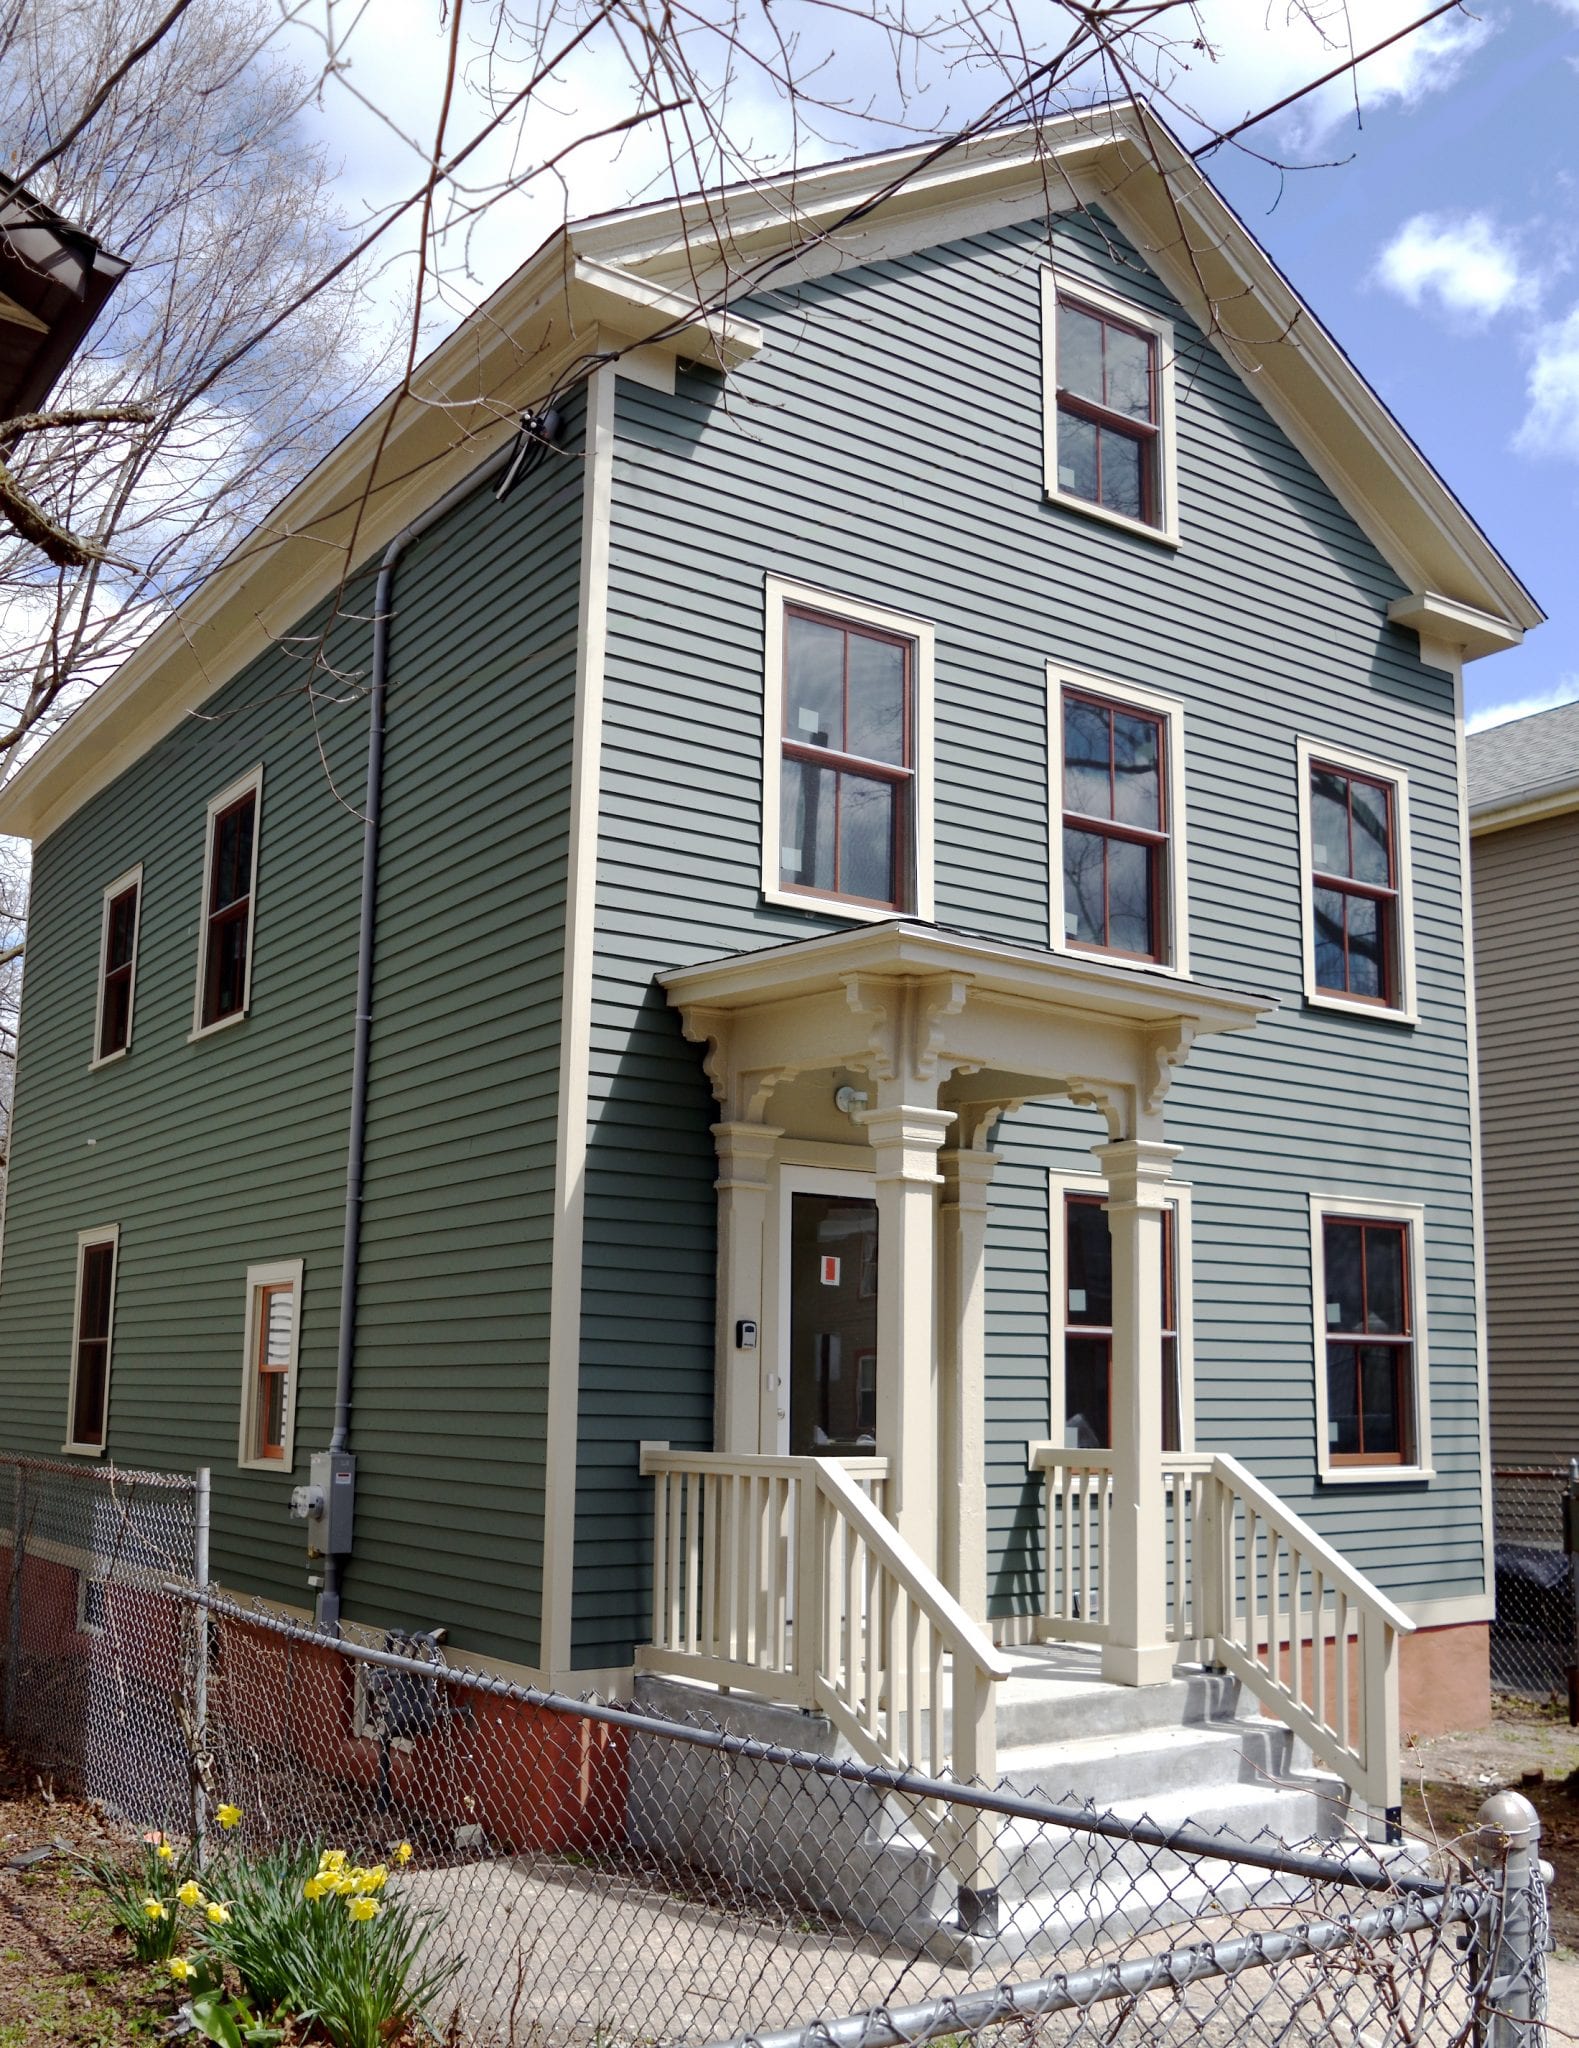 NHS of New Haven will be renovating 19 Lilac St. in 2020